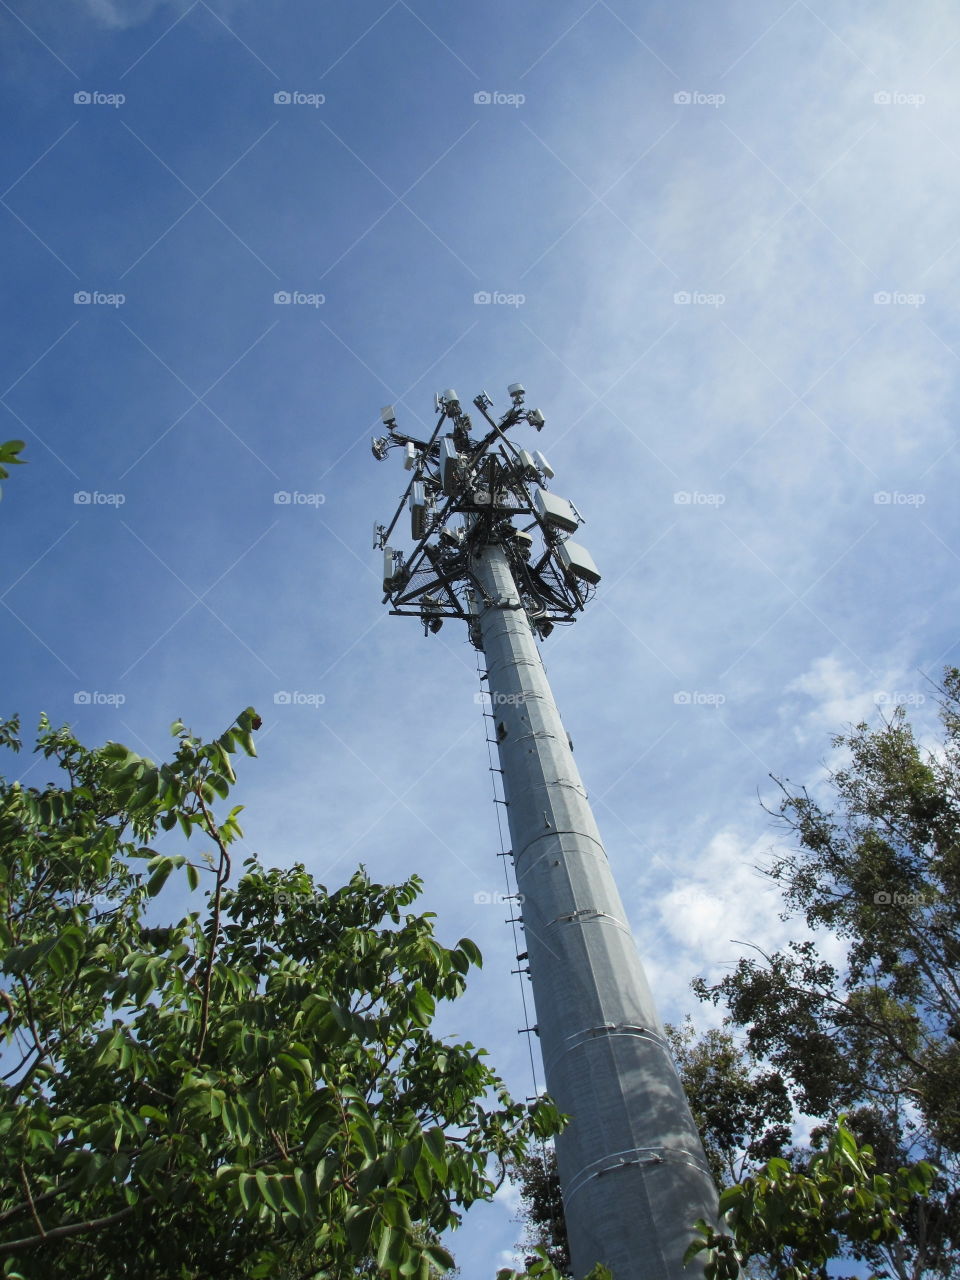 microwave tower. looking up at a microwave / communication tower